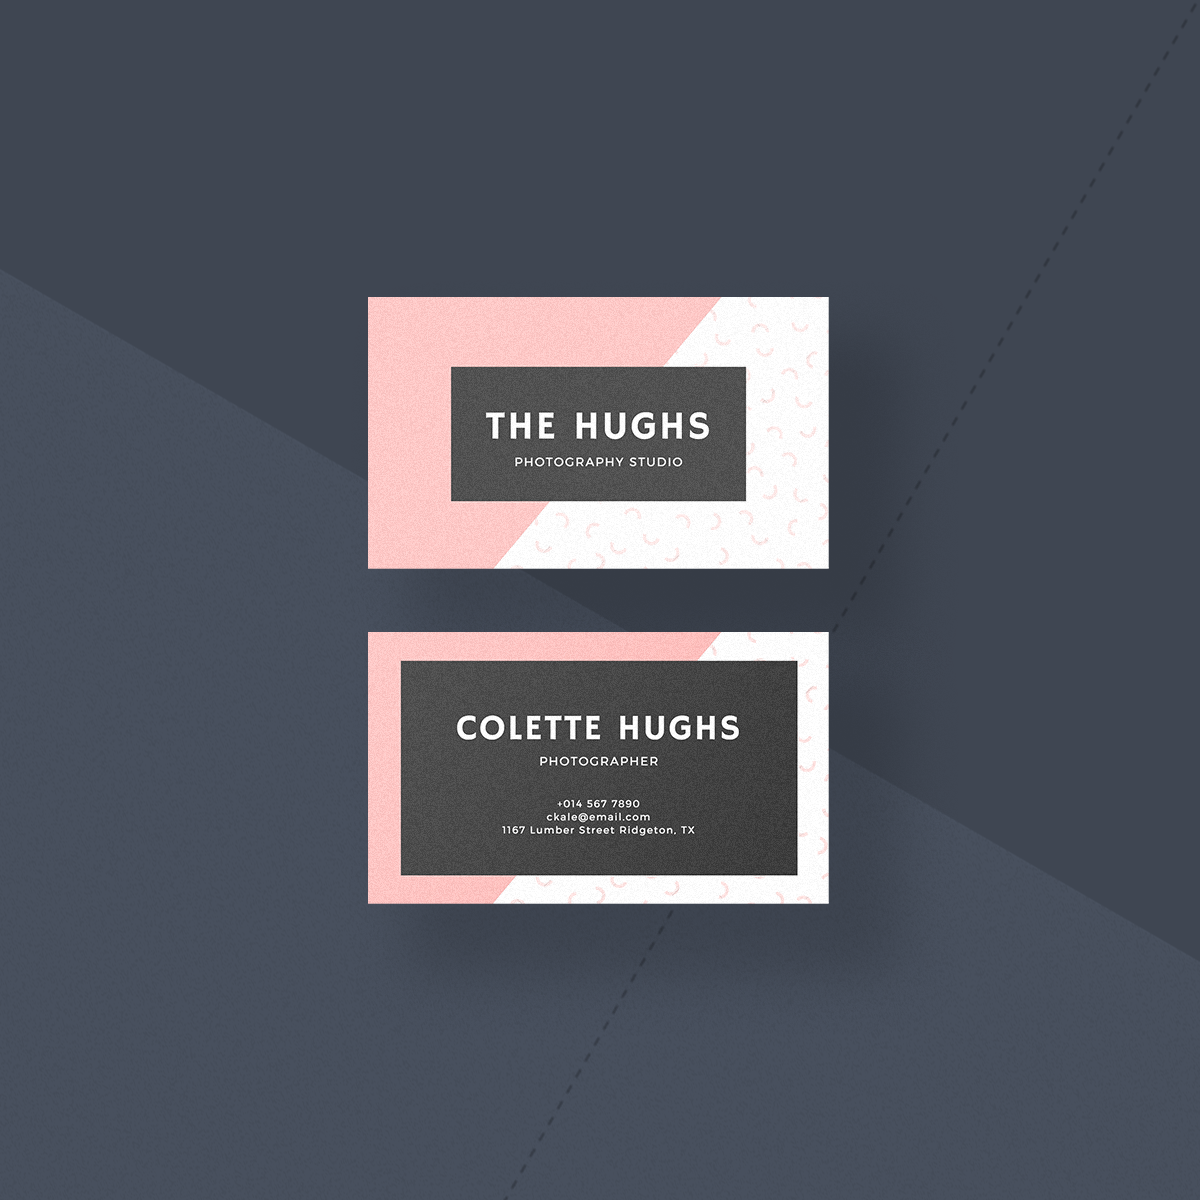 Herdenkings Maria paddestoel Business Card Sizes - Canva's Design Wiki size guide - Canva's Design Wiki